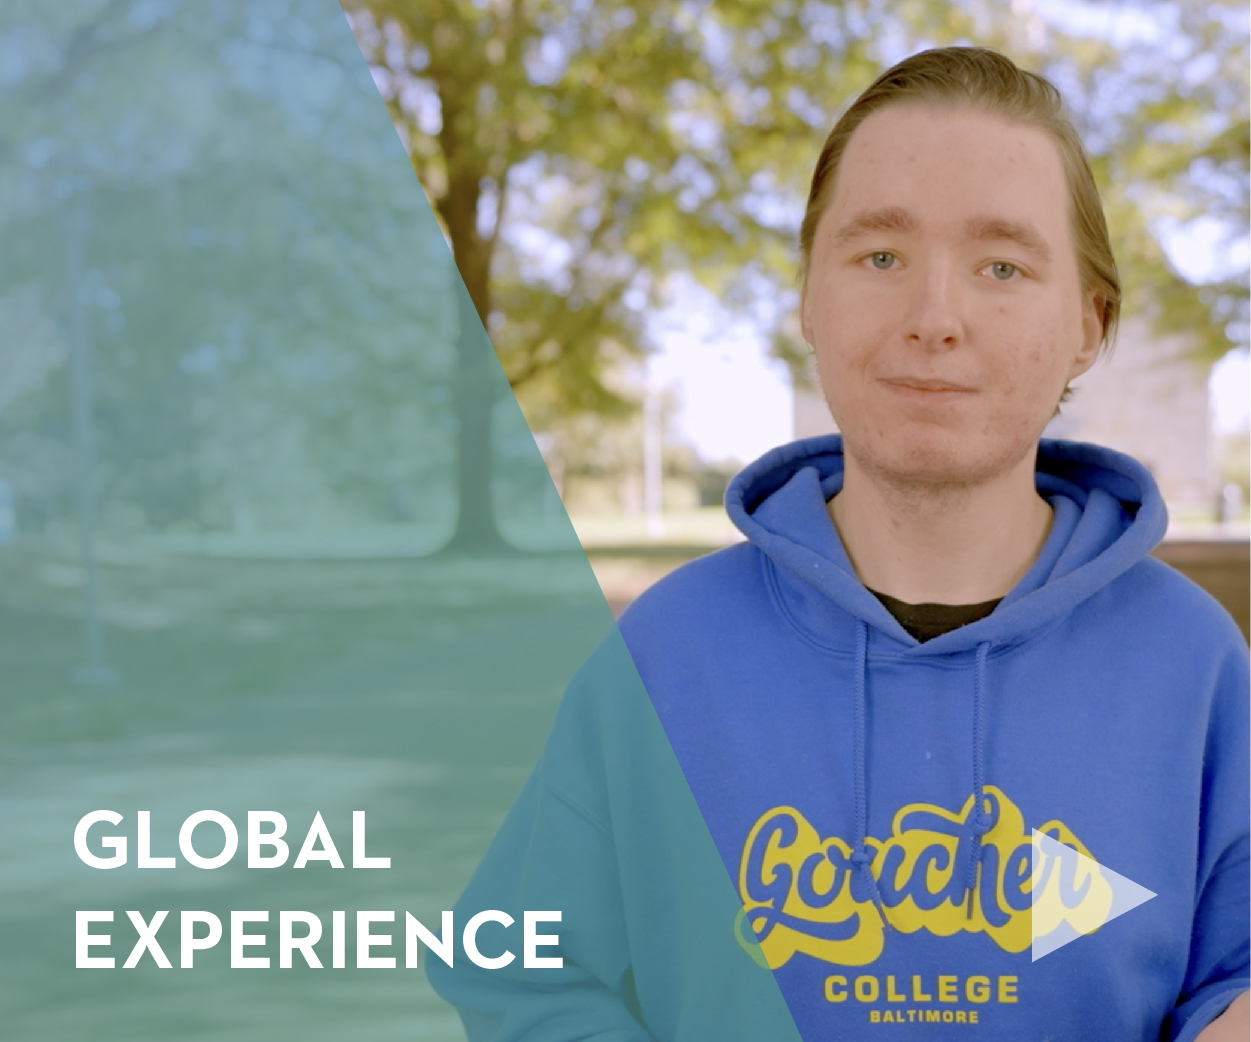 Global experience - video play button